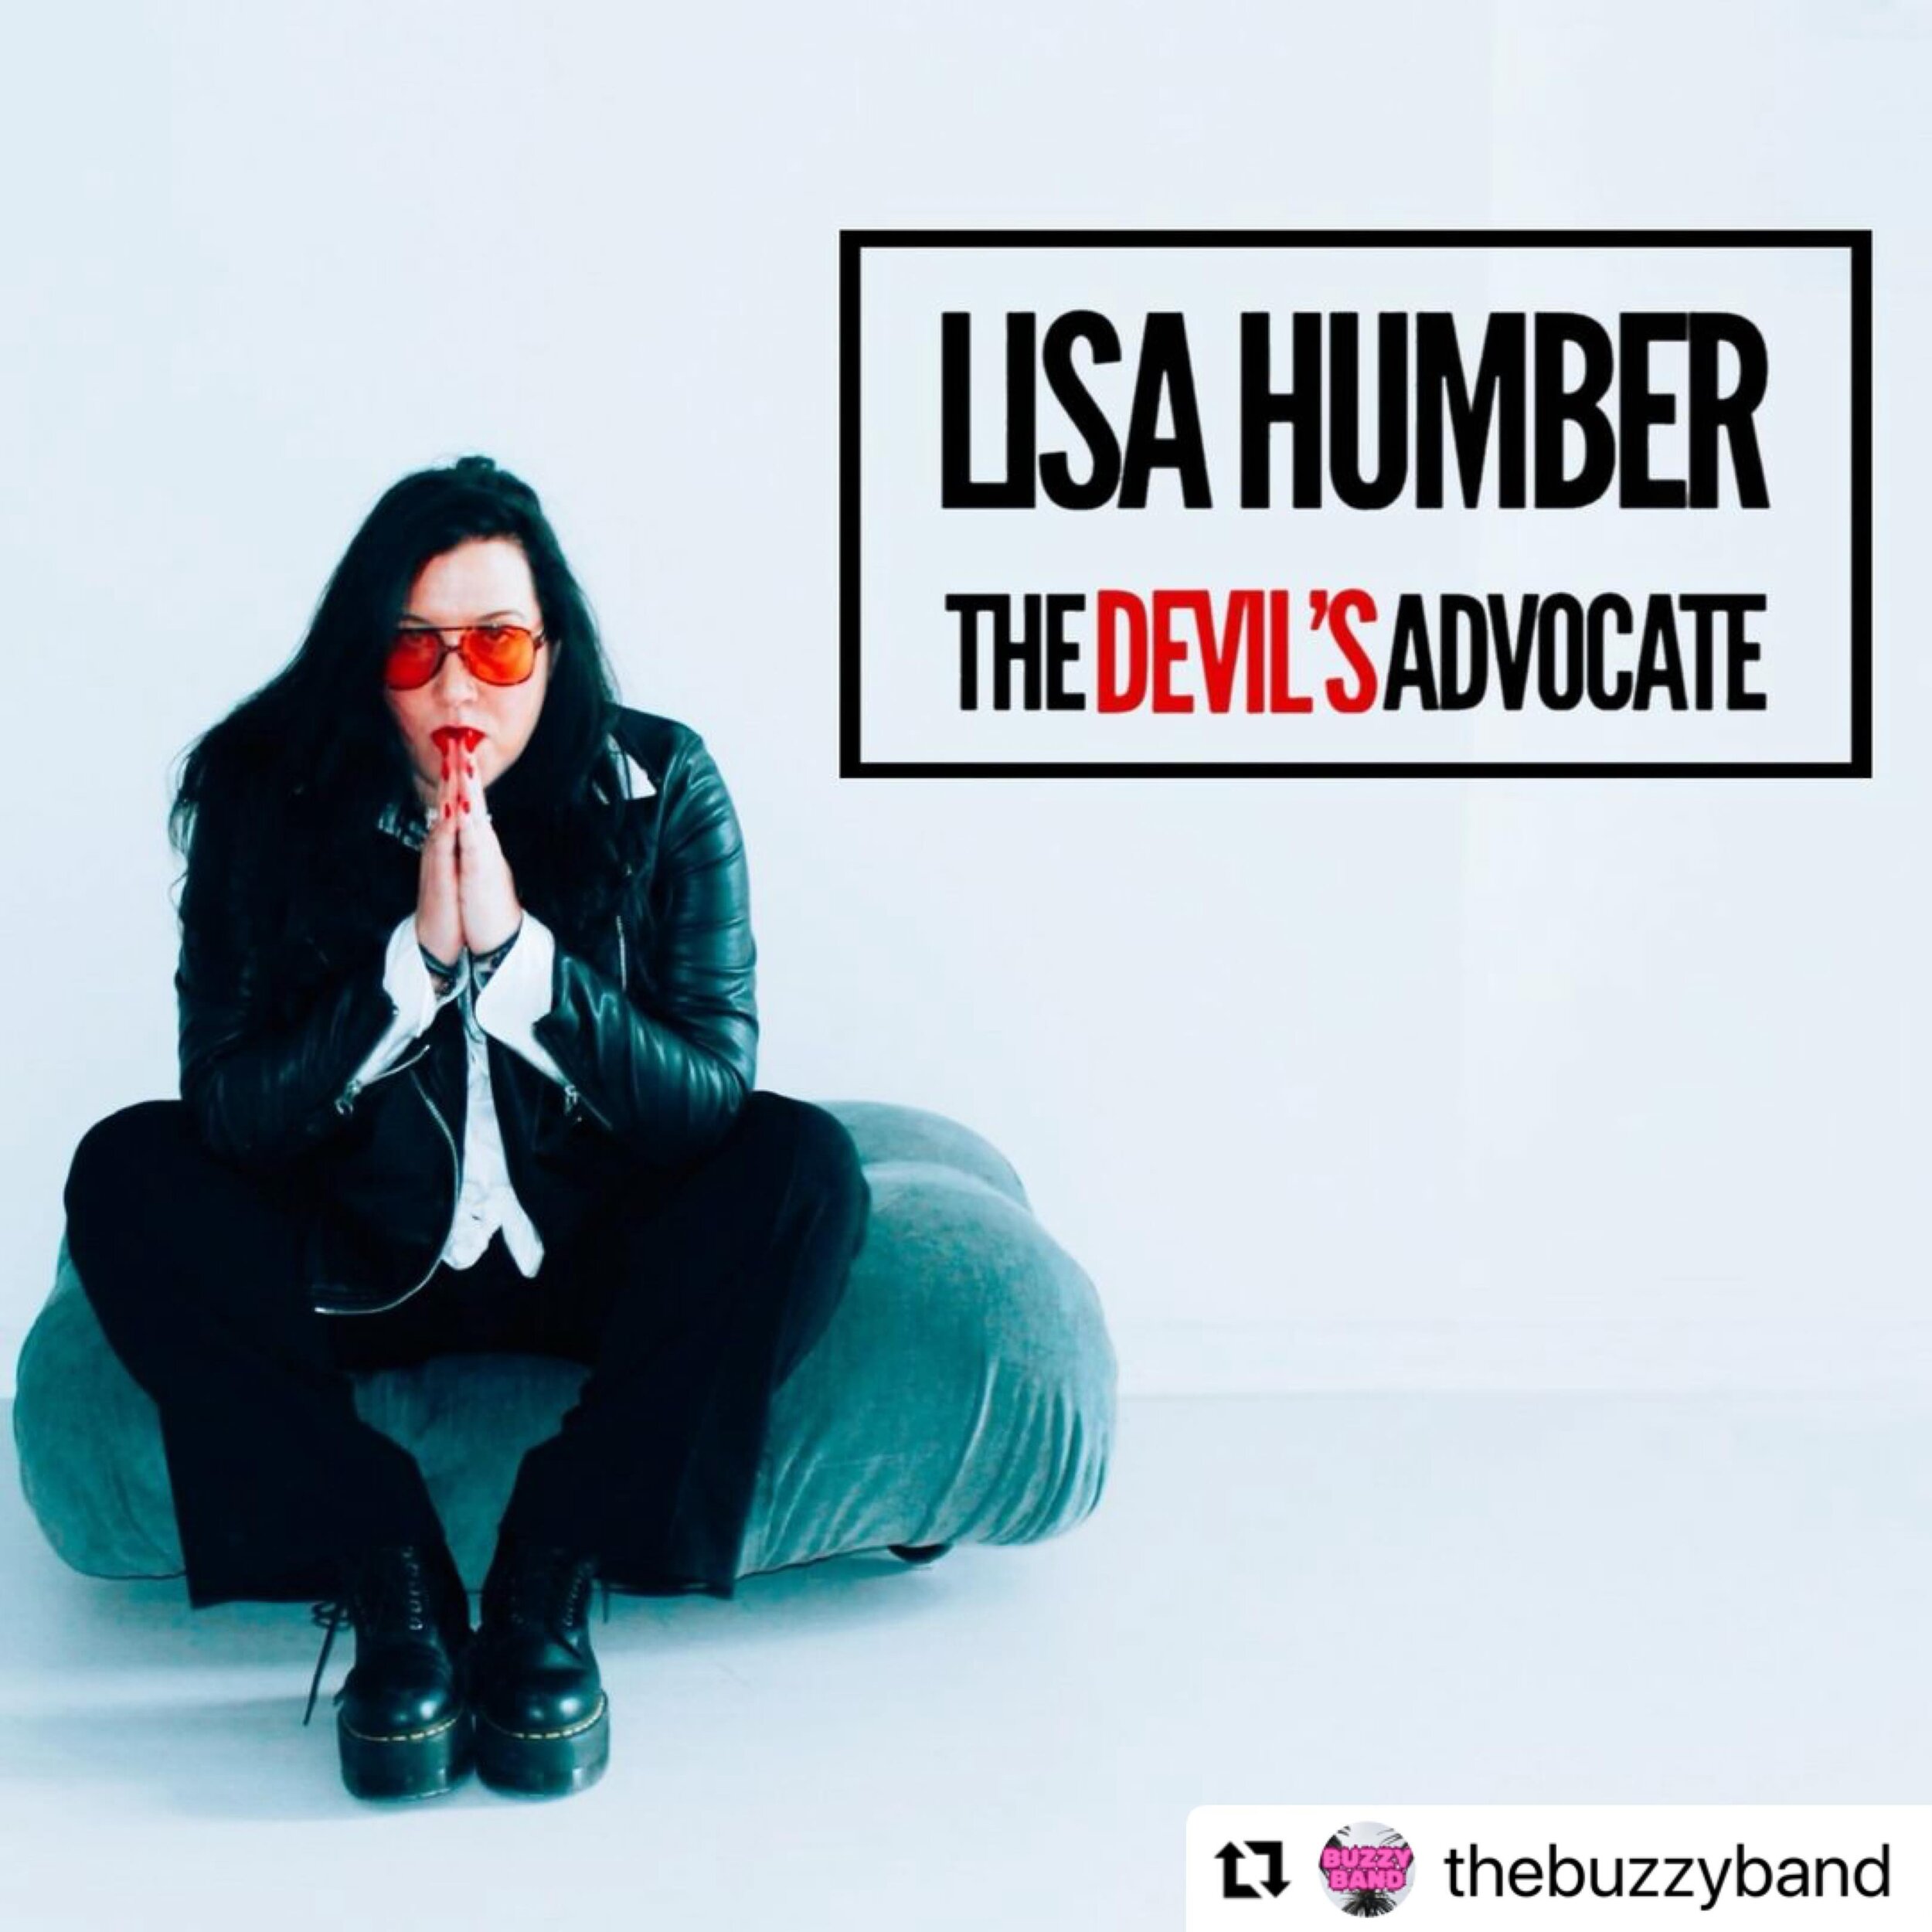 *SONG REVIEW*
Repost @thebuzzyband 
・・・
Check out &ldquo;The Devil&rsquo;s Advocate&rdquo; from Lisa Humber (lisahumber)

&ldquo;...brightness of the melodies make it very easy to sing along, yet there&rsquo;s a hint of devilish passion&rdquo;

READ
